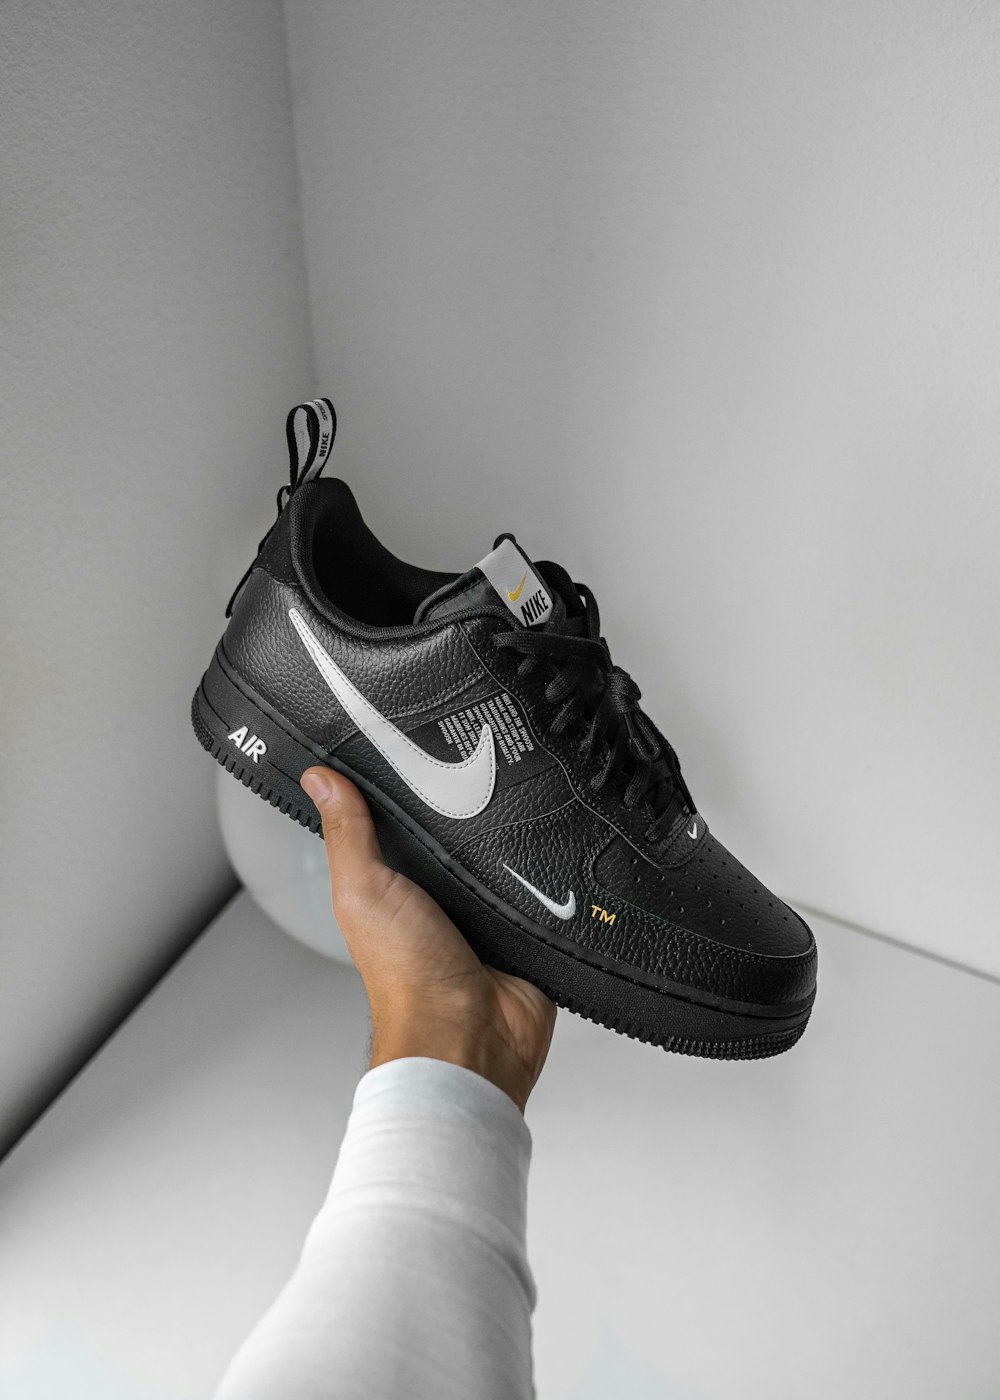 black and white Nike Air Force 1 sneaker